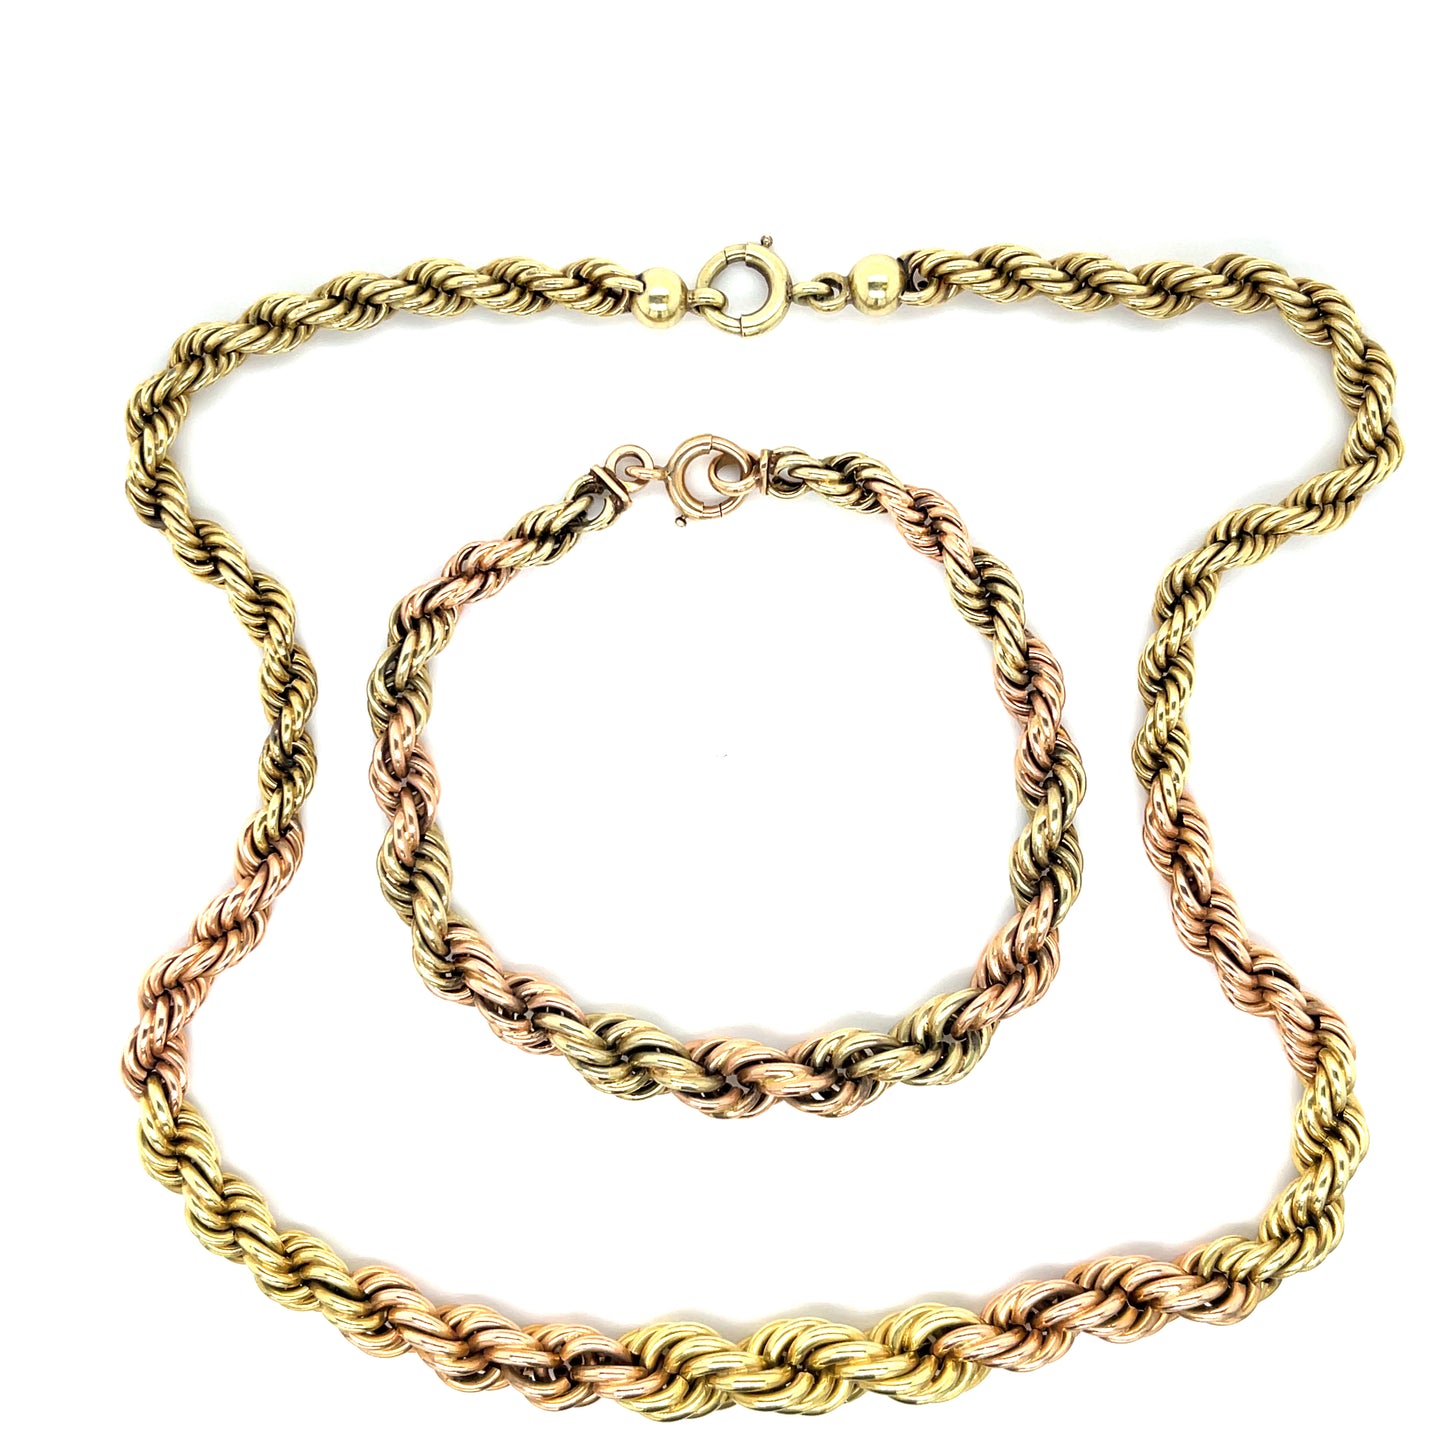 Retro (Circa 1940s) All Original 14KY Rose and Green Gold Graduated French Rope Chain Necklace and Bracelet Set